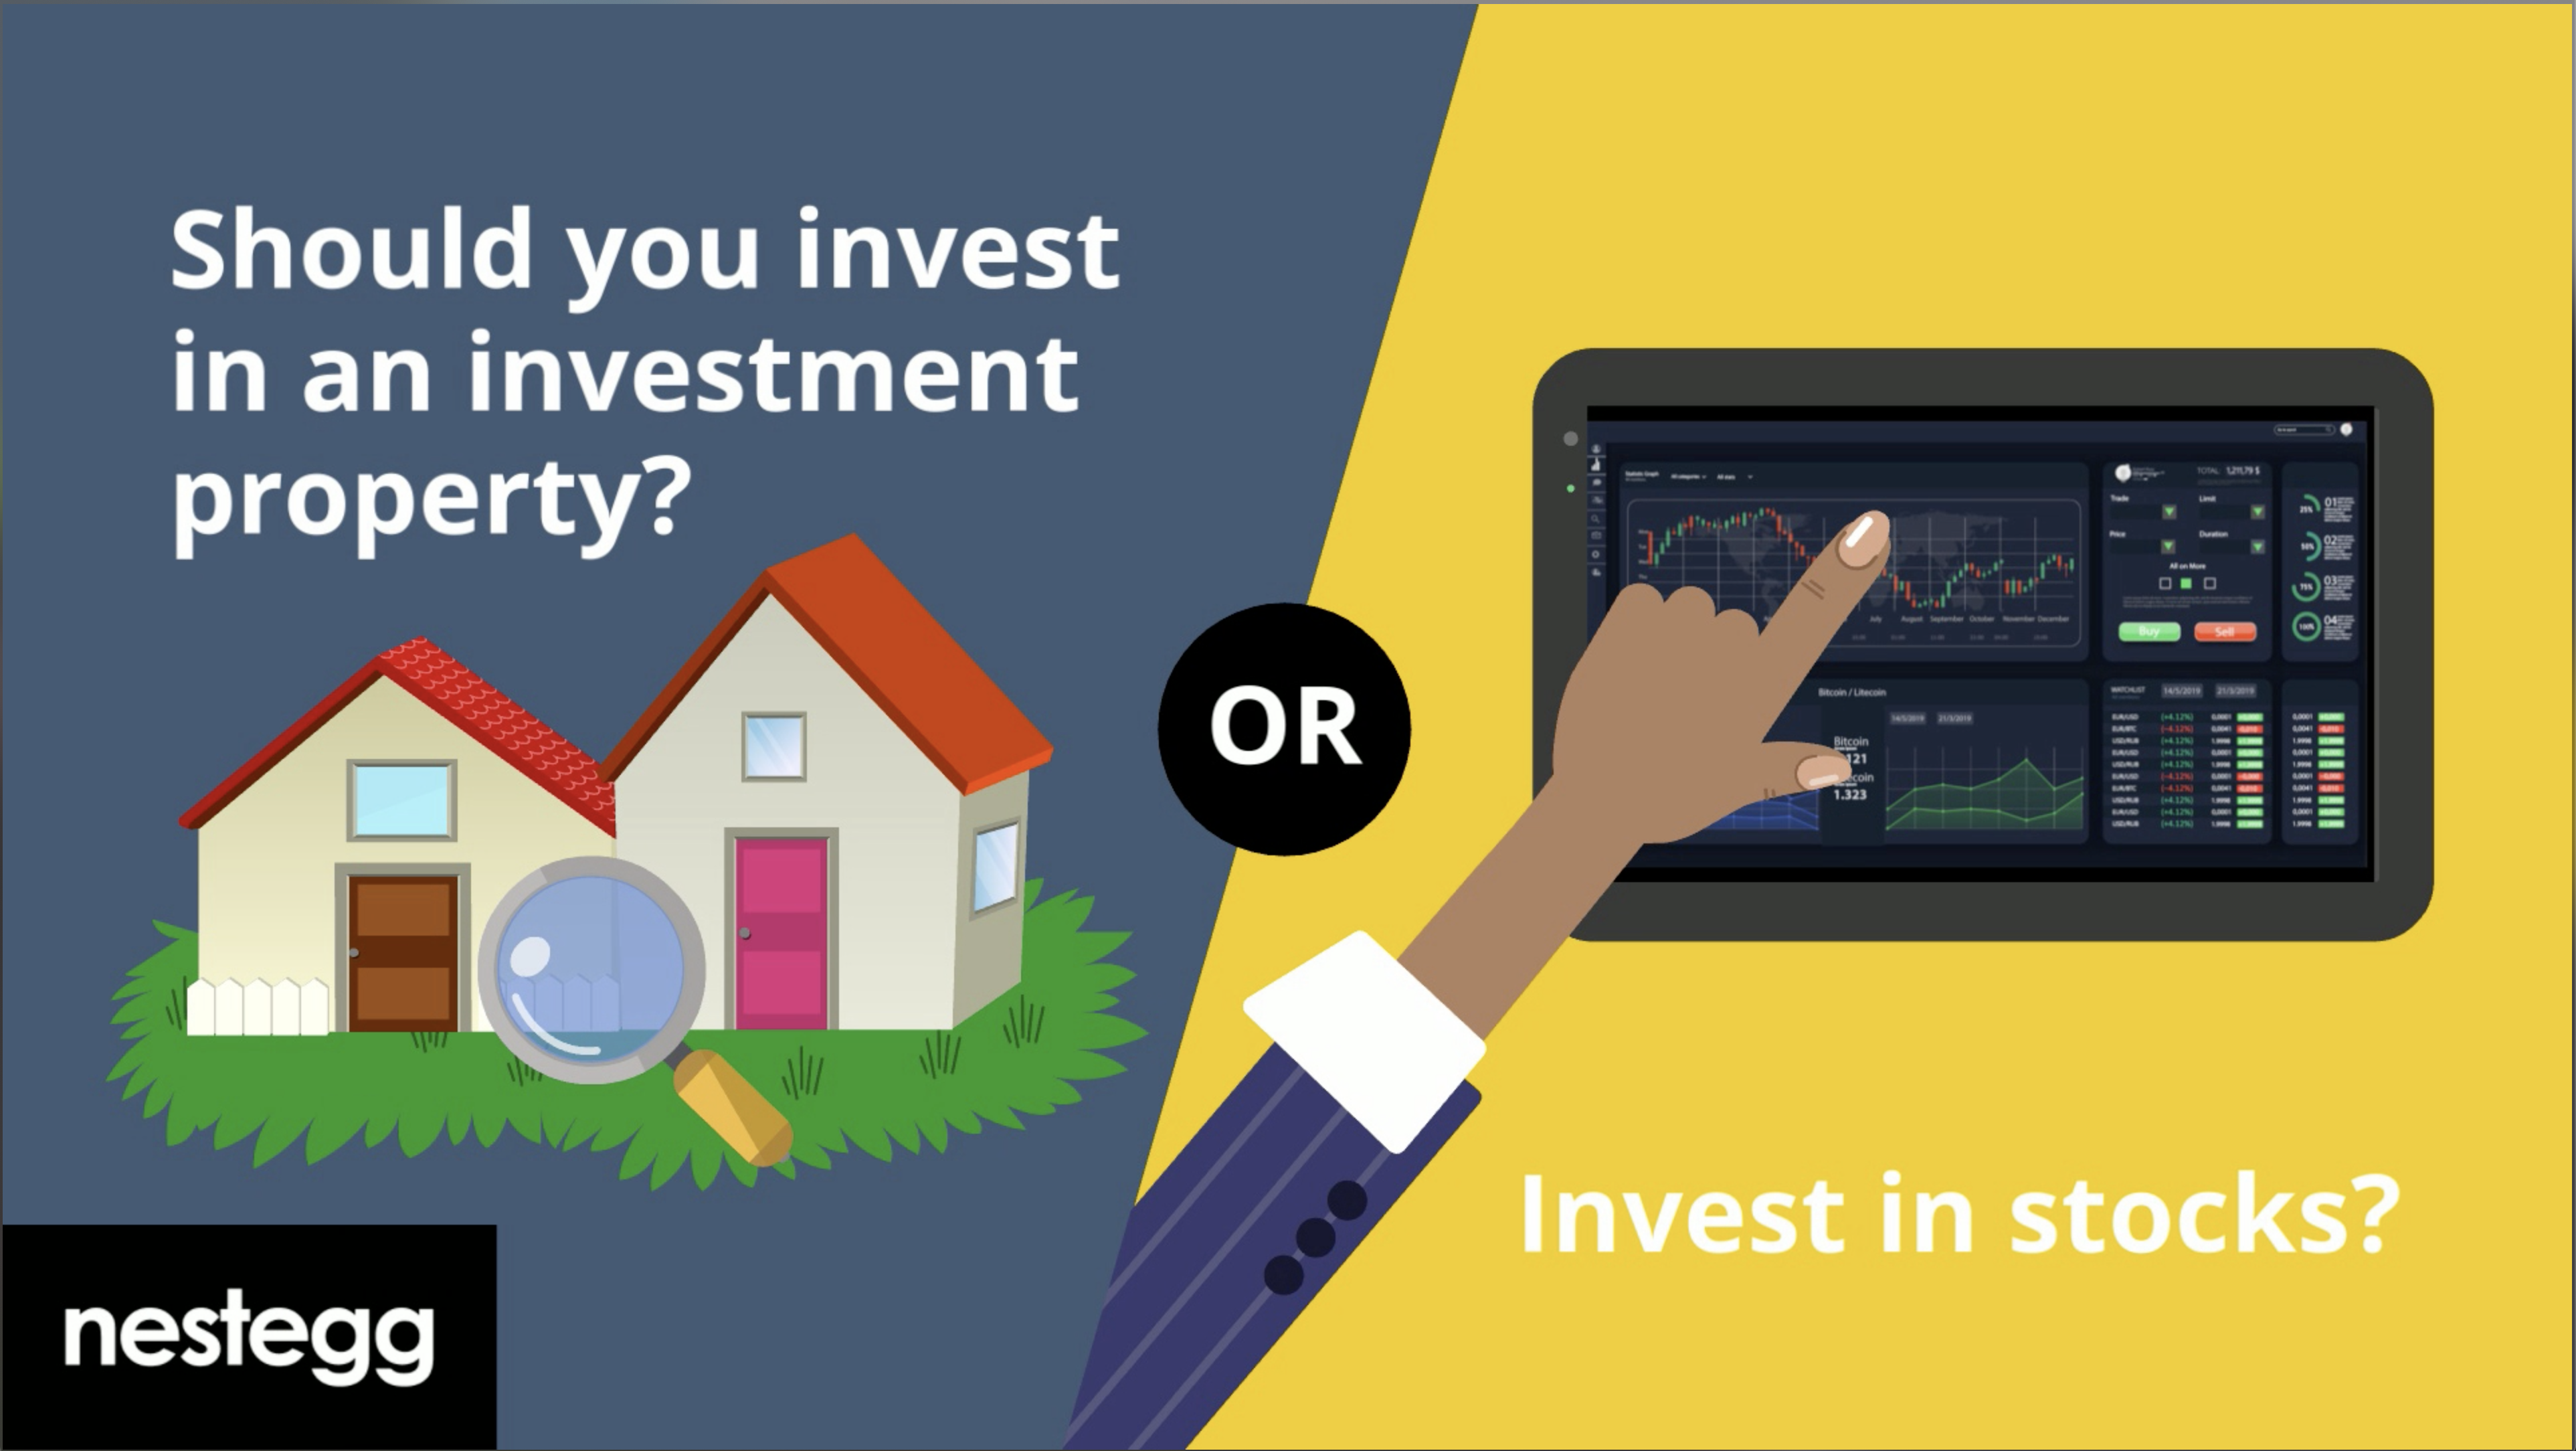 Investment property or stocks?